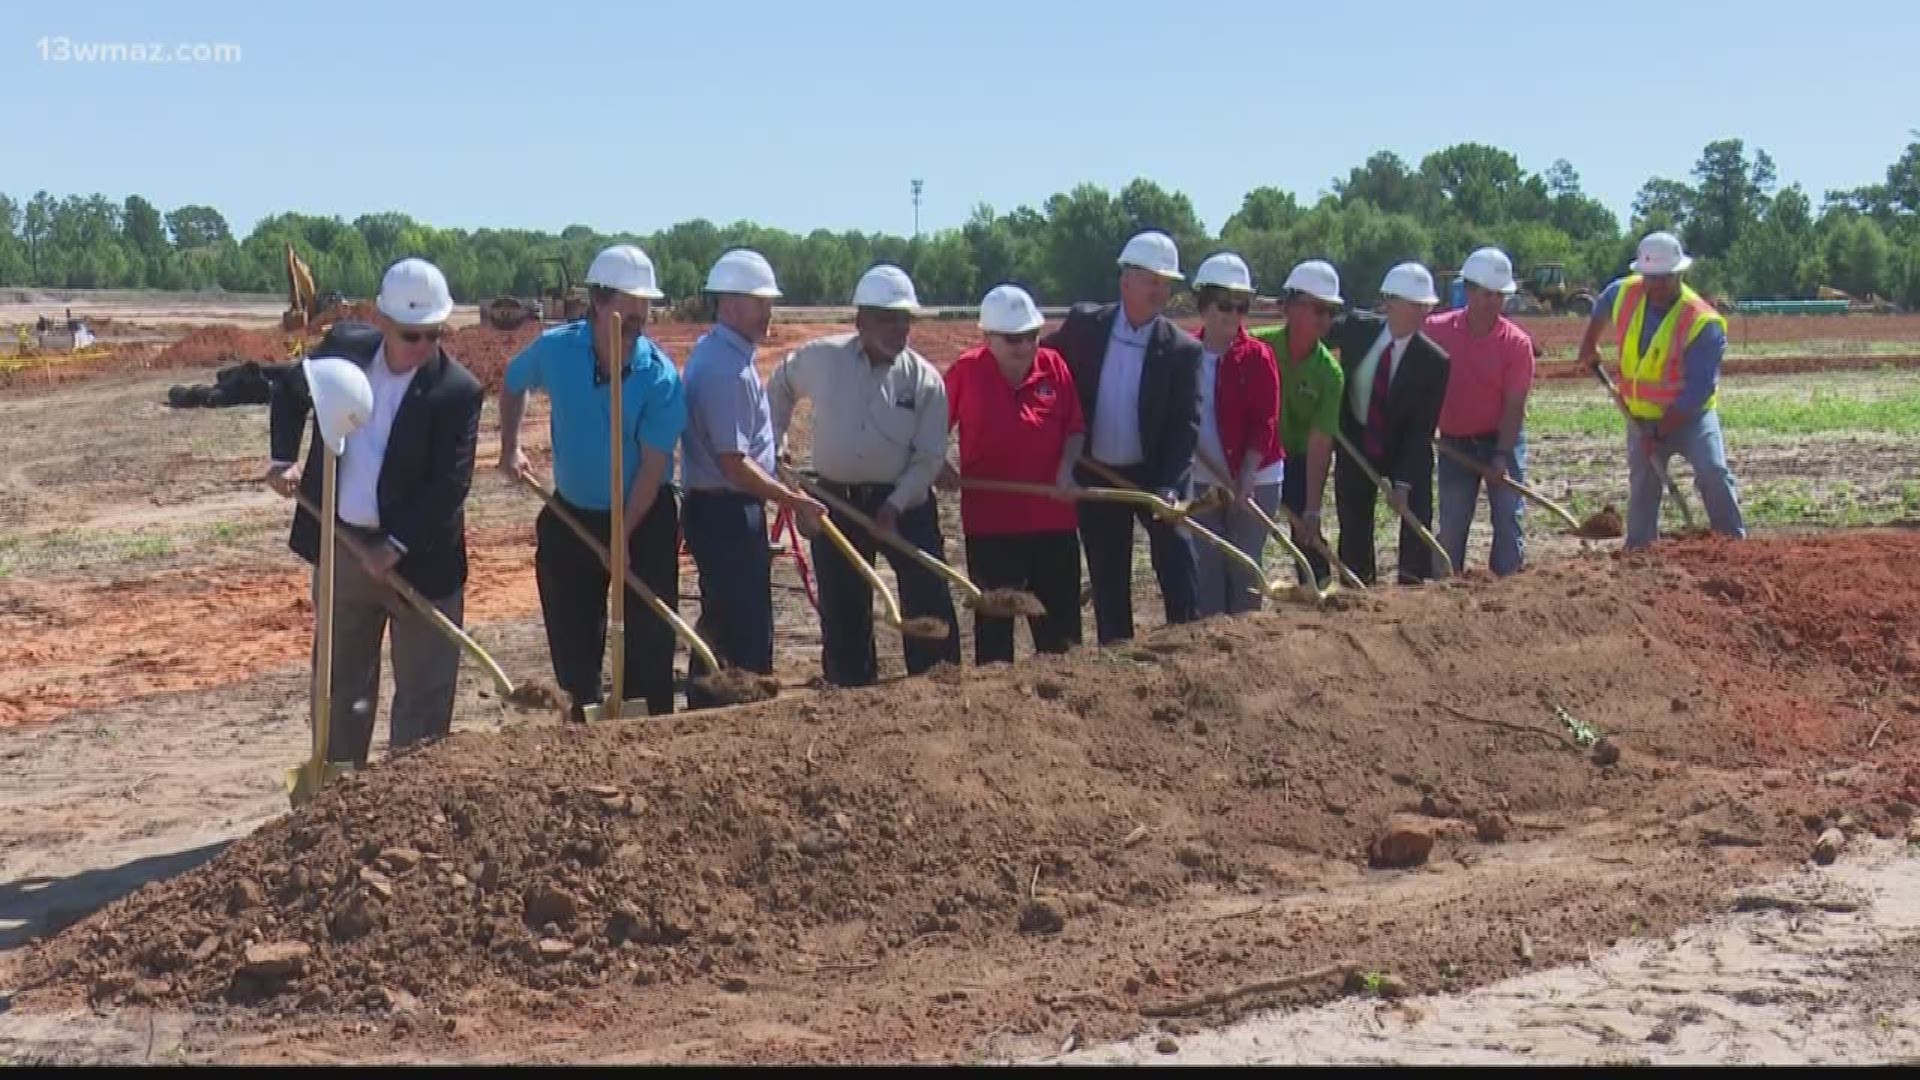 People gathered on North Houston Road in Warner Robins Friday for the groundbreaking for a new recreation center. The new complex will have basketball courts, fitness rooms, and a raised track.